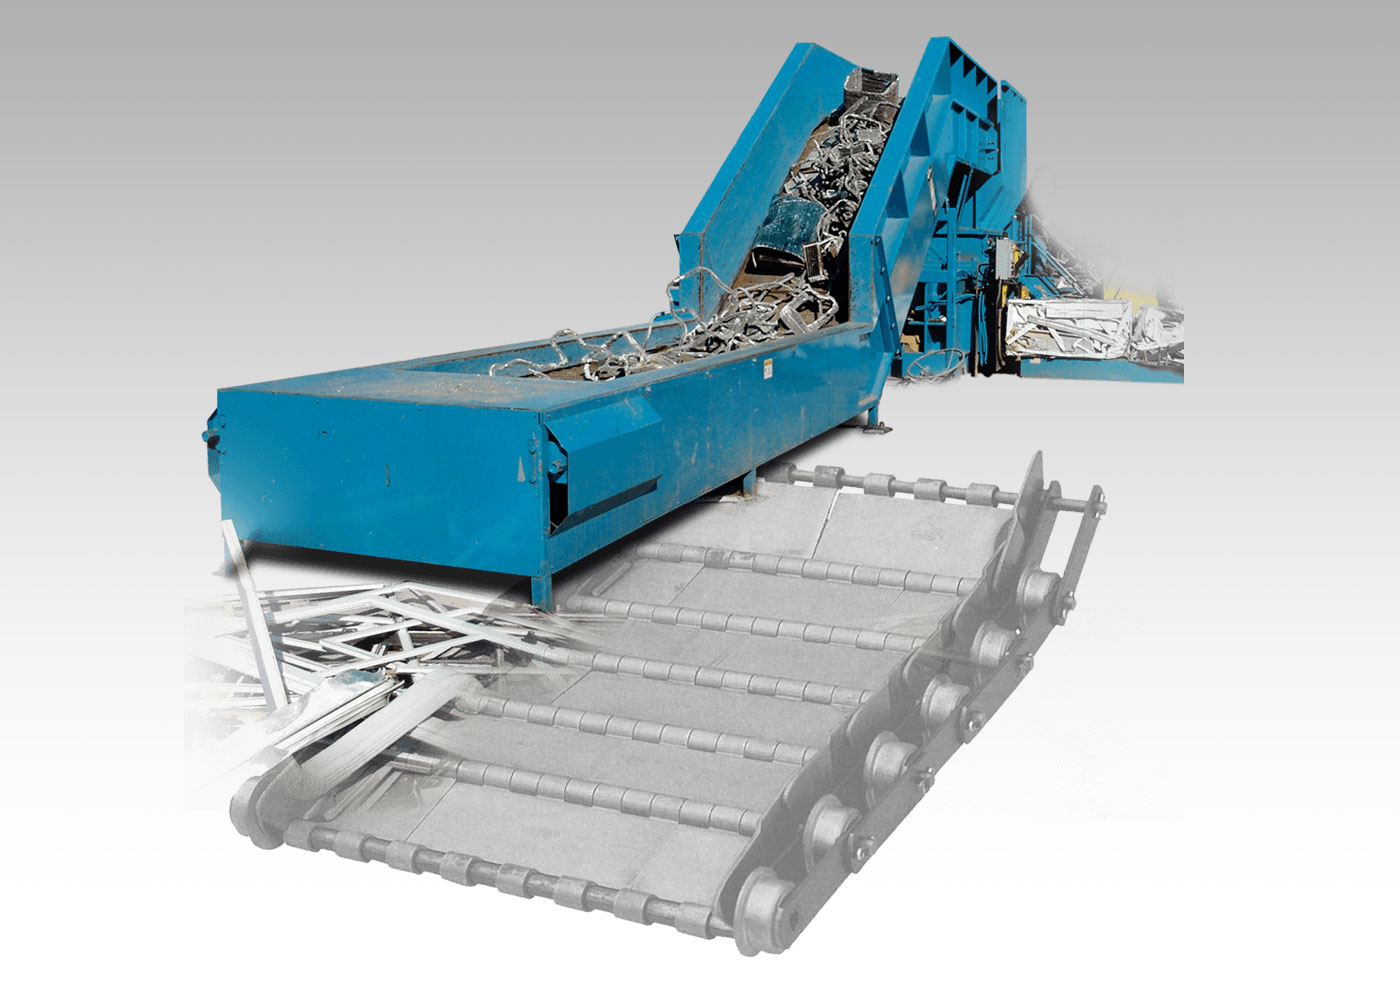 Recycling Conveyor Systems For Sale - Conveyors for balers & compactors